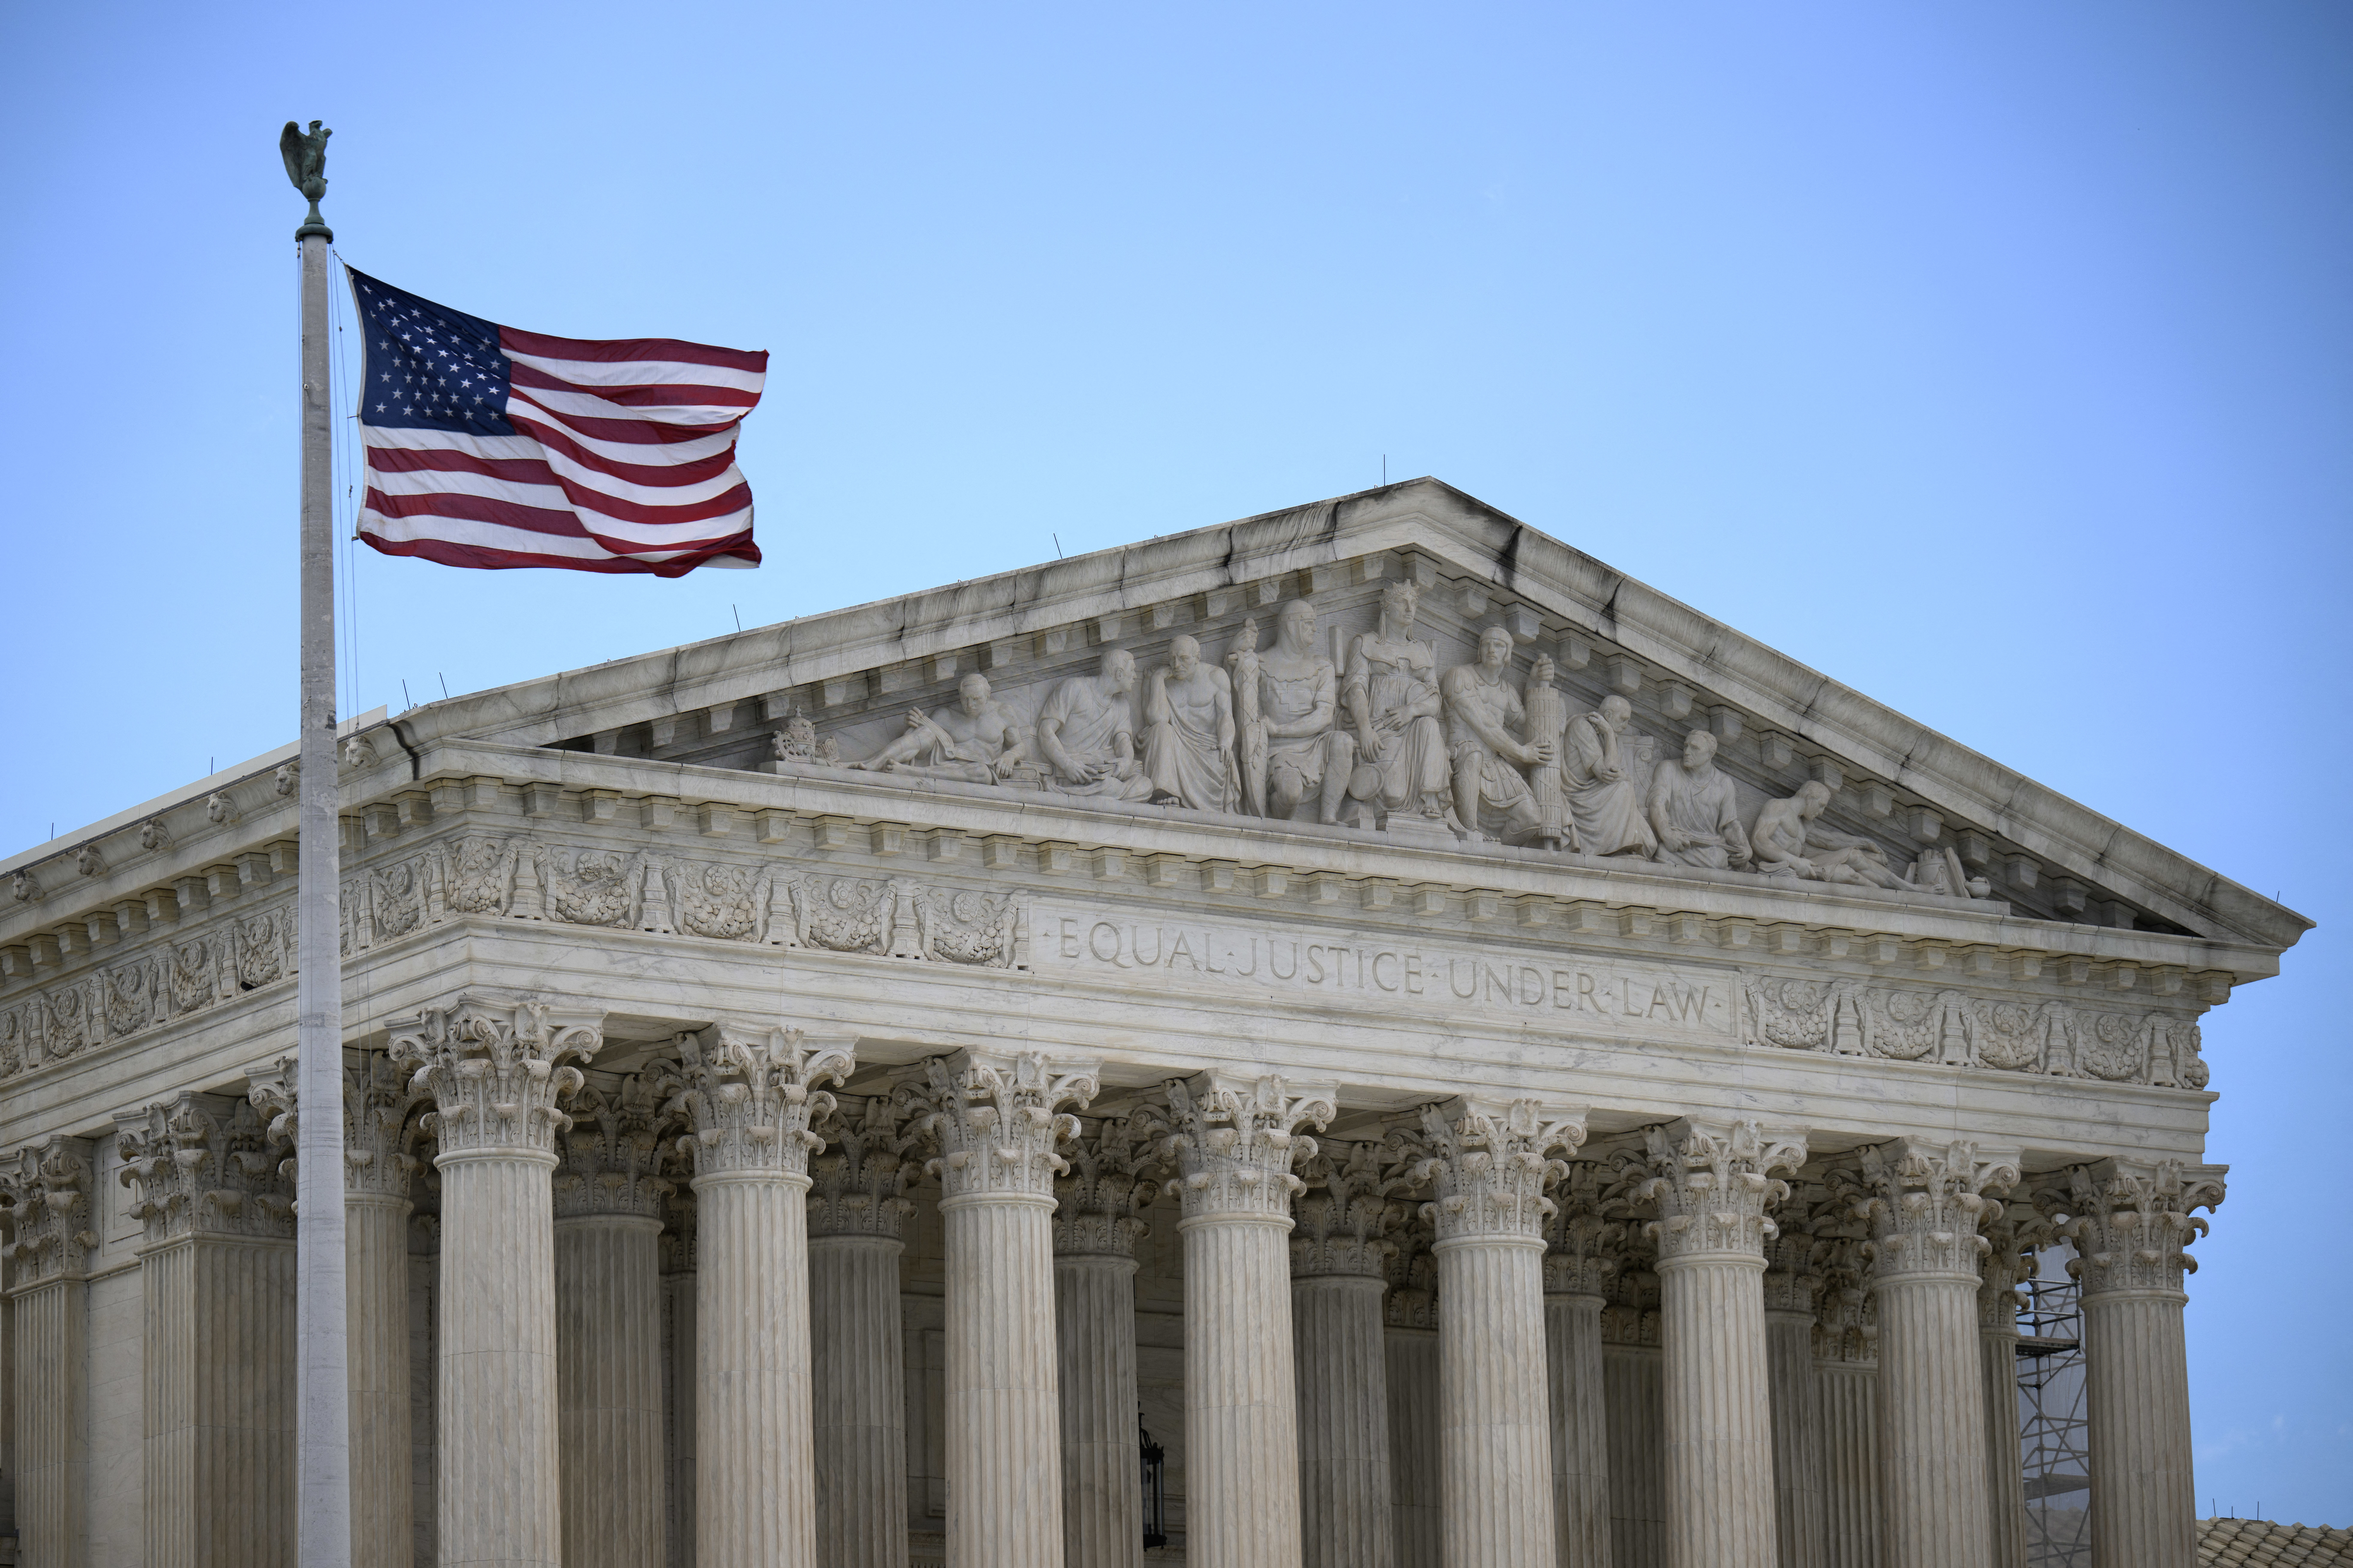 The image shows the front facade of the United States Supreme Court building with the American flag flying in the foreground. The inscription reads: &quot;EQUAL JUSTICE UNDER LAW.&quot;